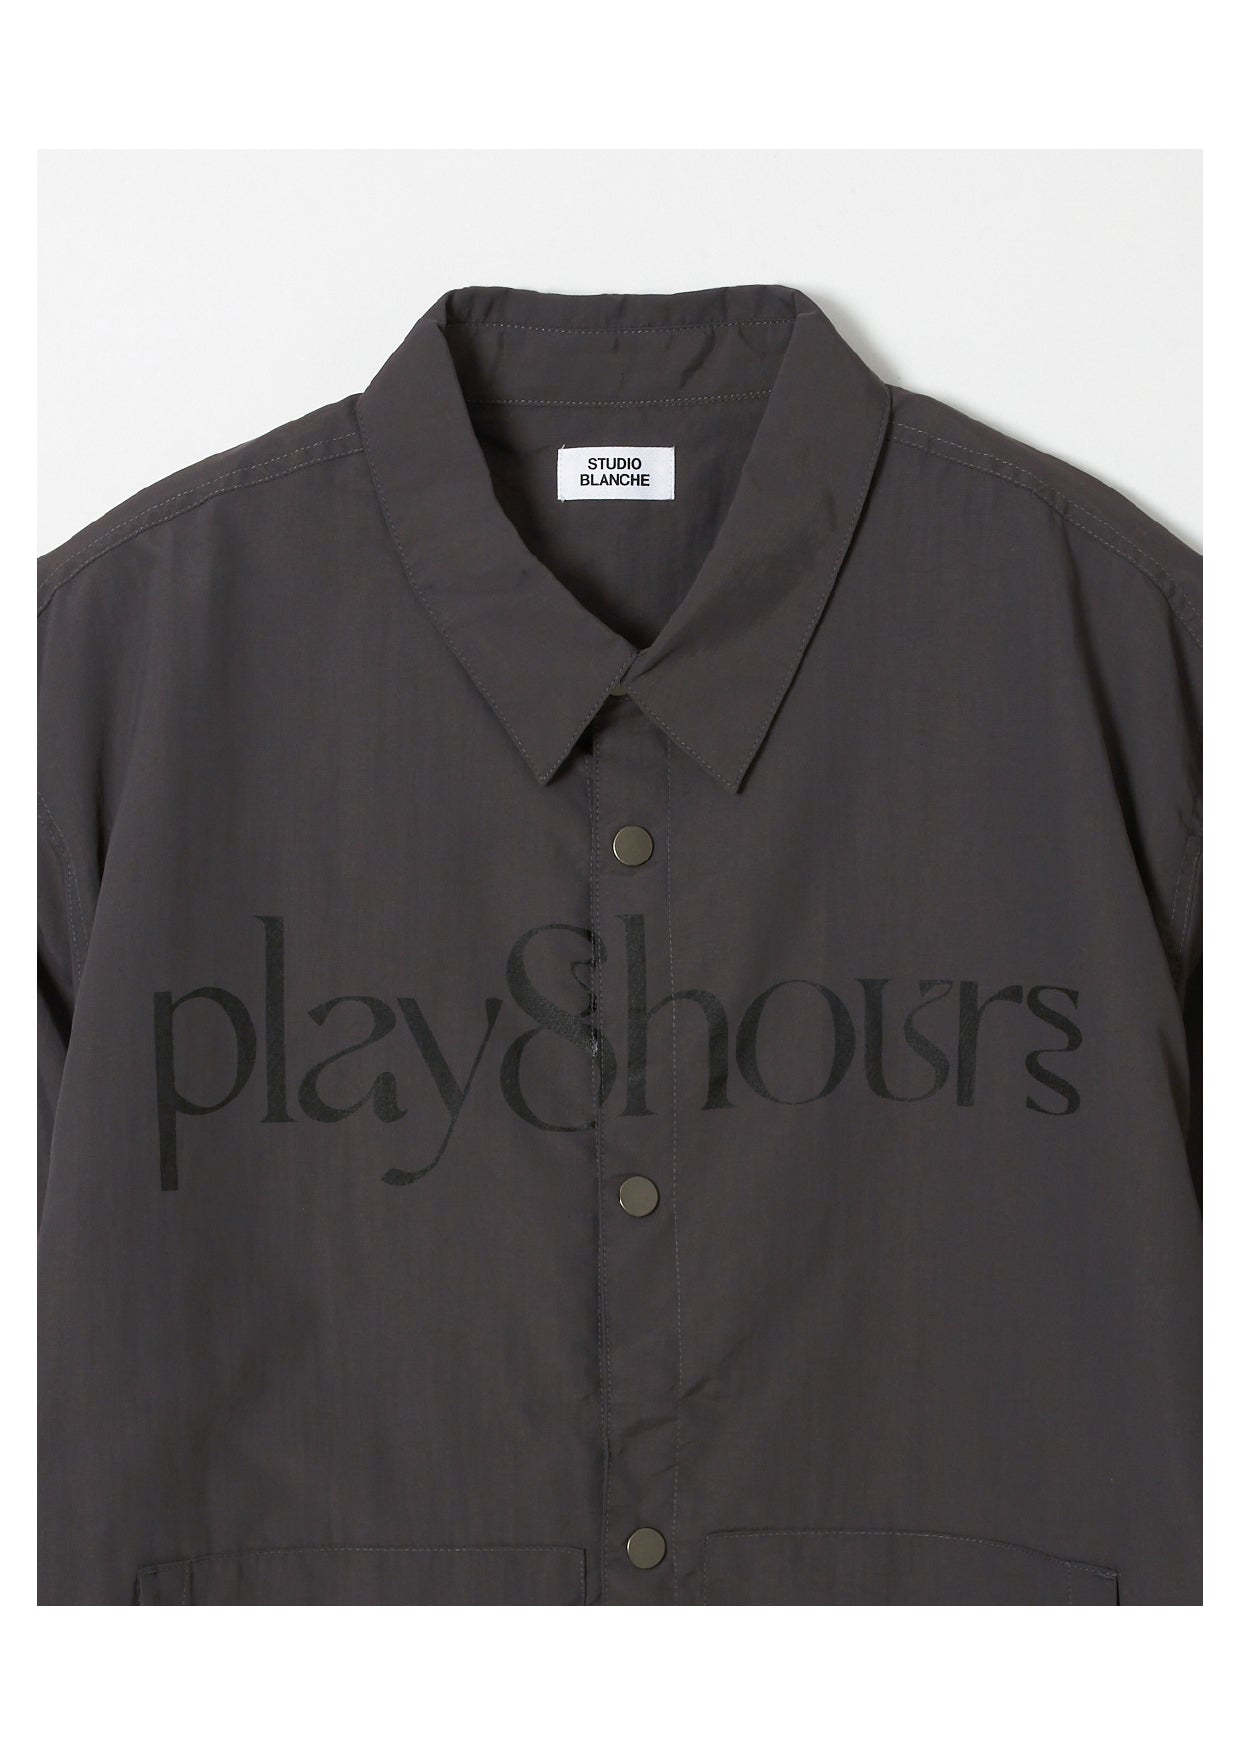 Play8hours Jacket